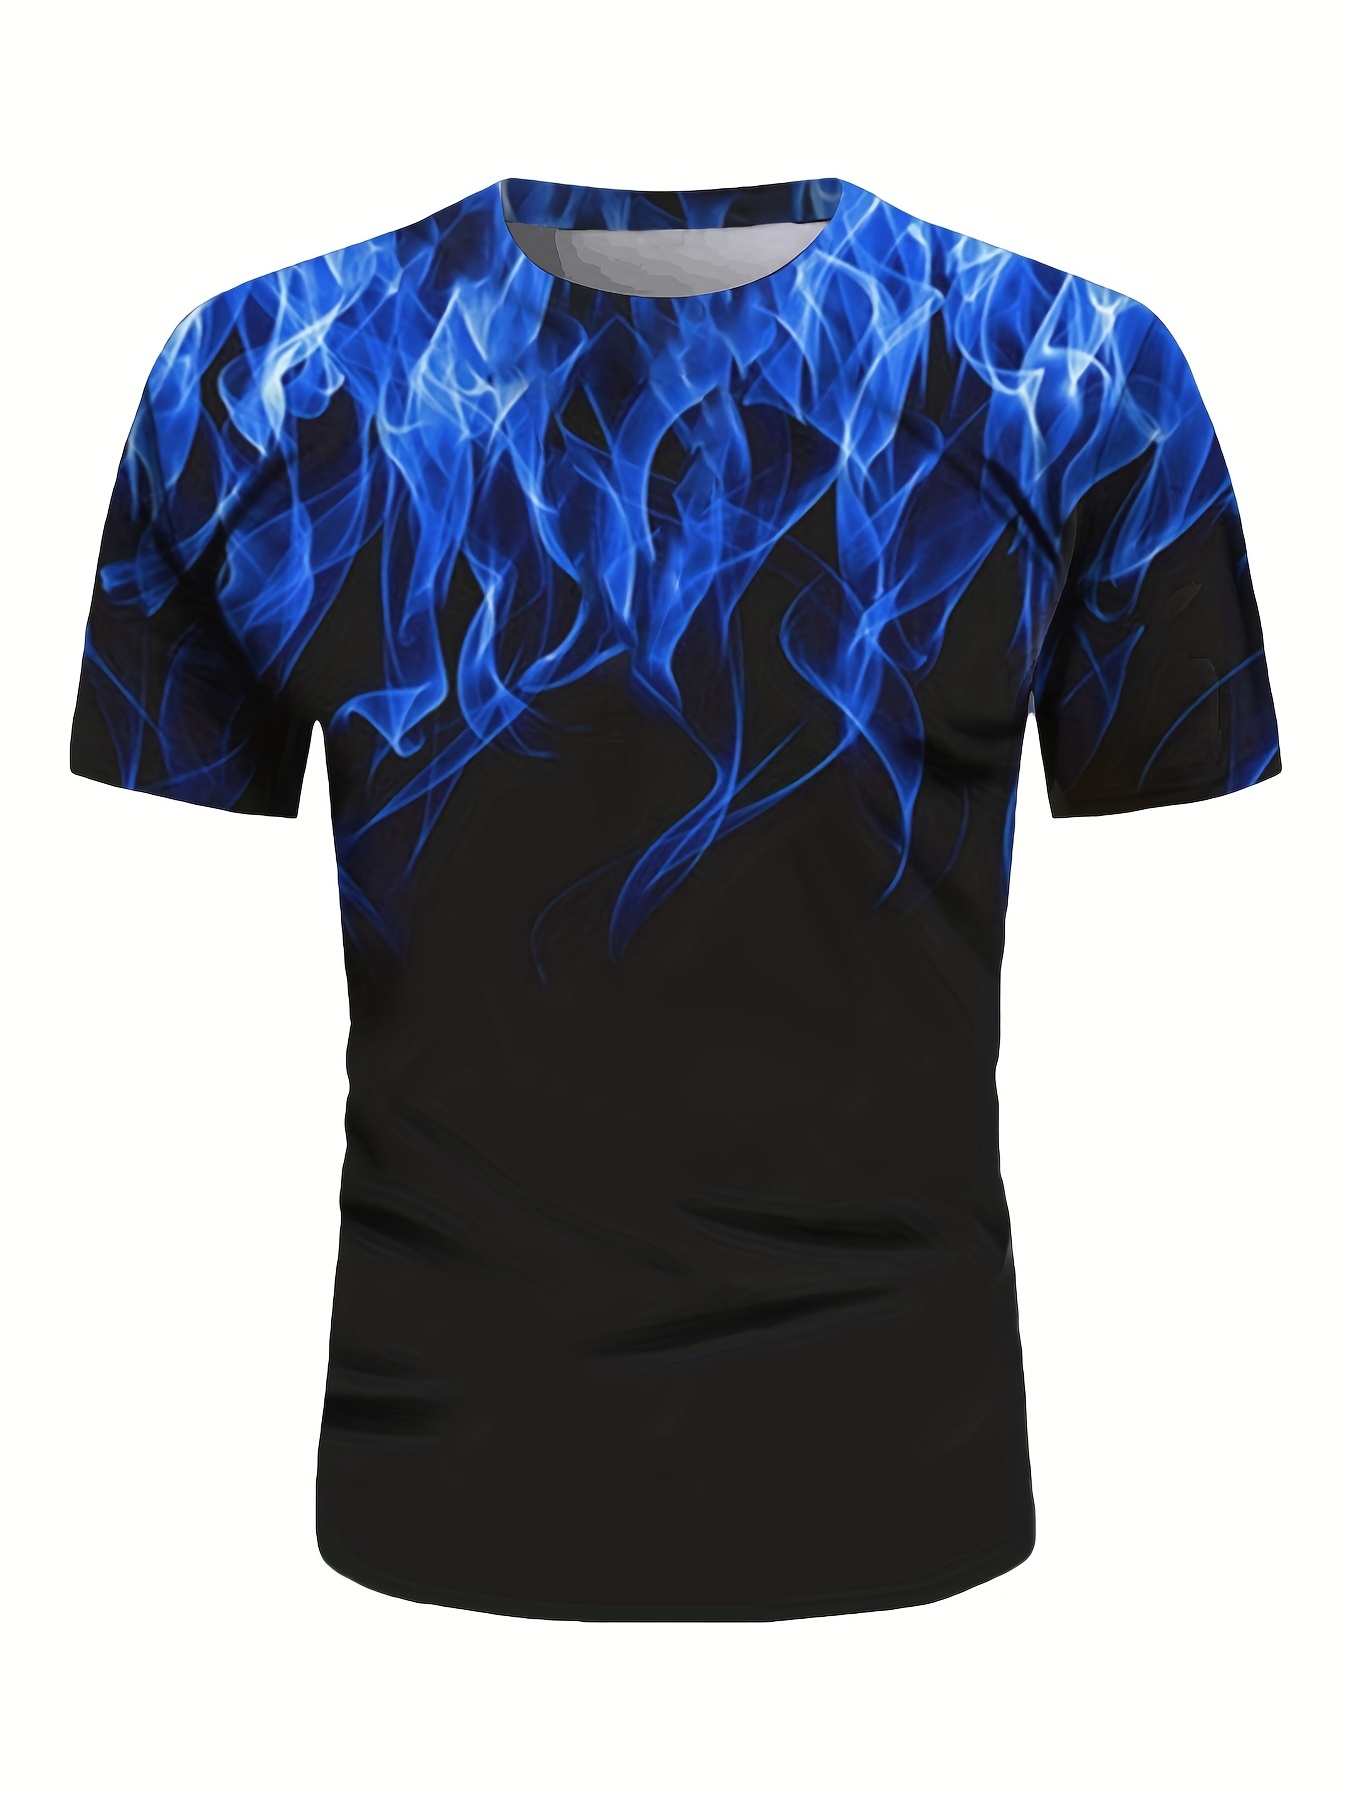 ZCFZJW 3D Flame Pattern Graphic T-Shirts for Men Casual Short